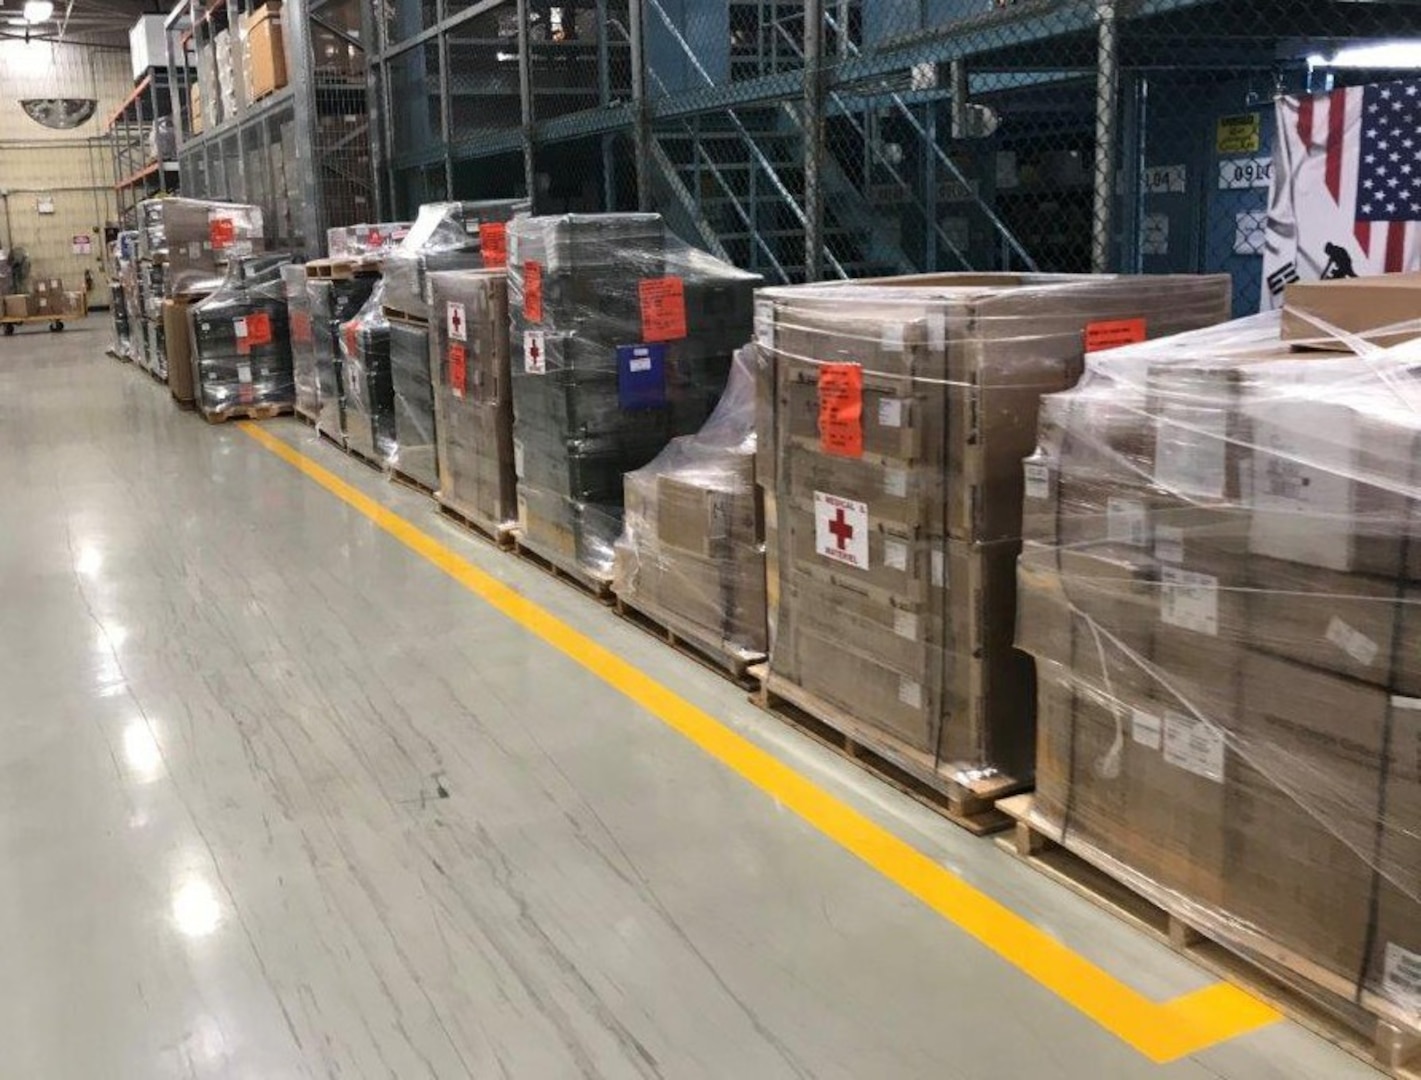 Pallets of medical equipment are prepared for distribution in support of Eighth Army medical units. (Courtesy)